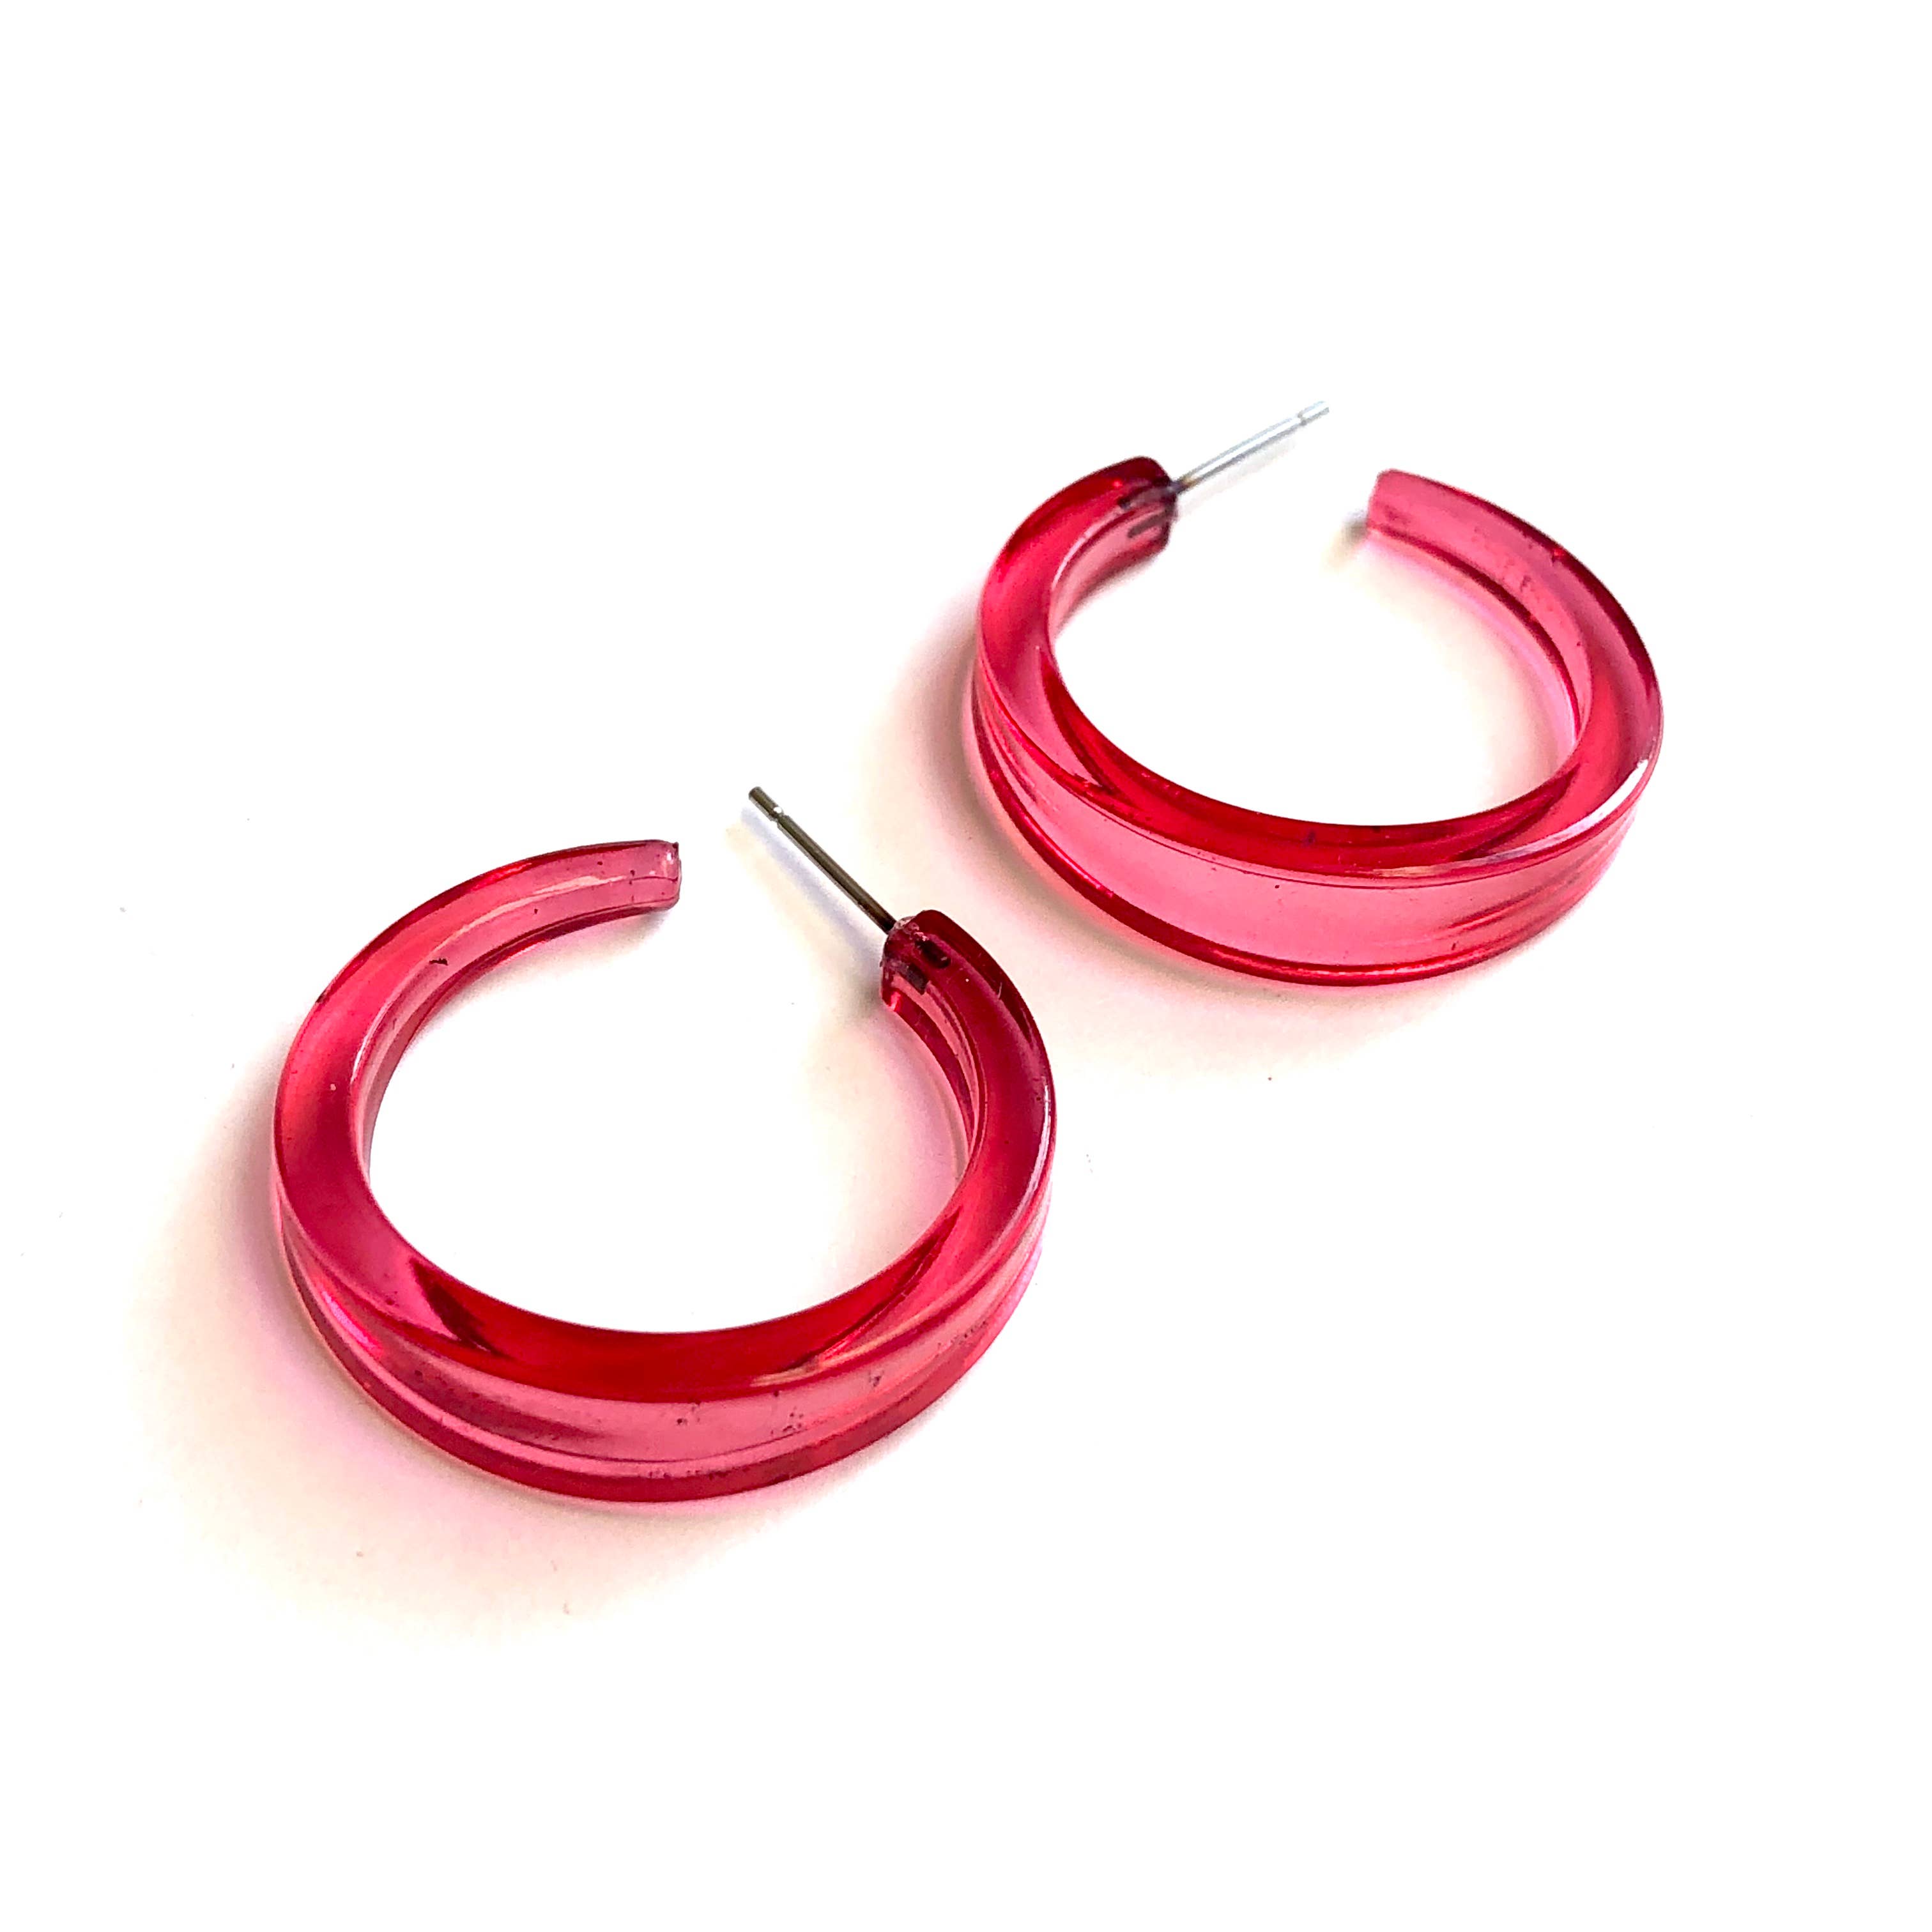 Big Bad Wolf And Little Red Riding Hood Hoop Earrings  Les Nereides